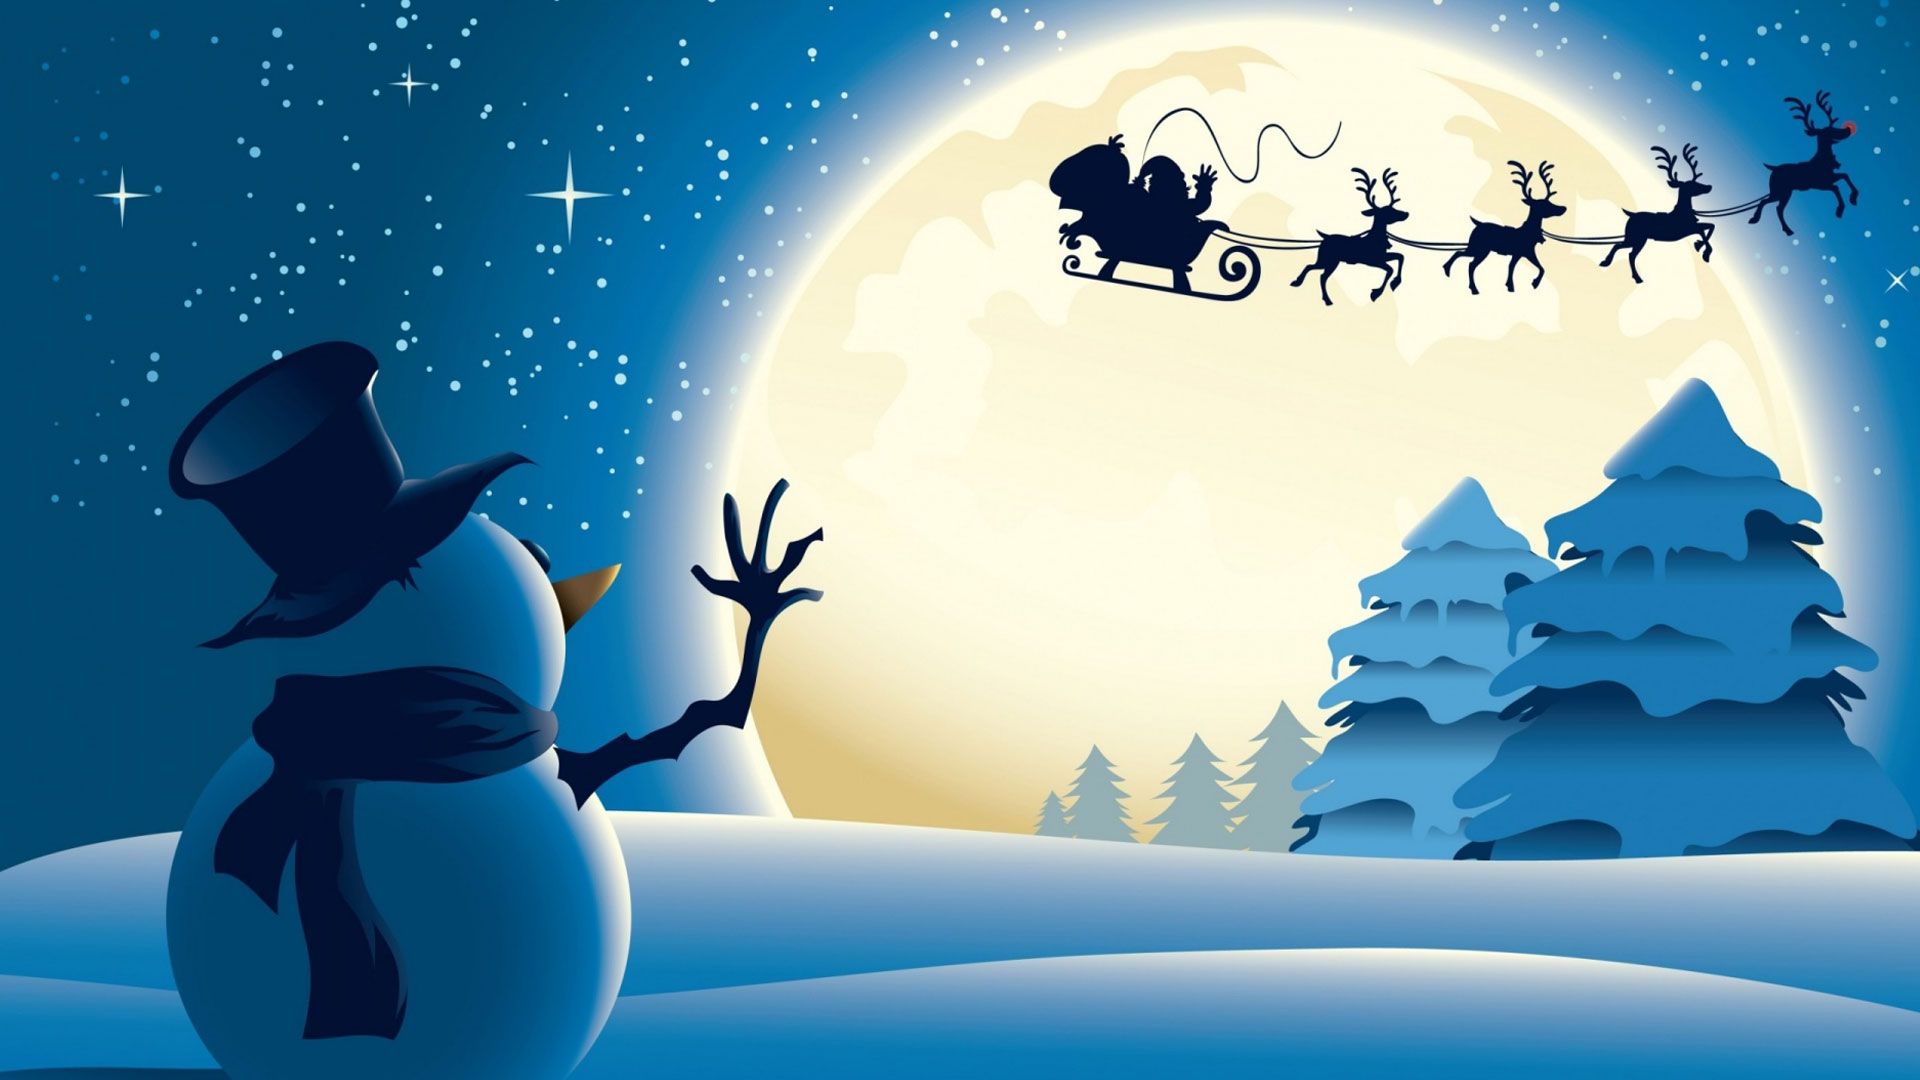 Merry Christmas 2014 hd wallpapers